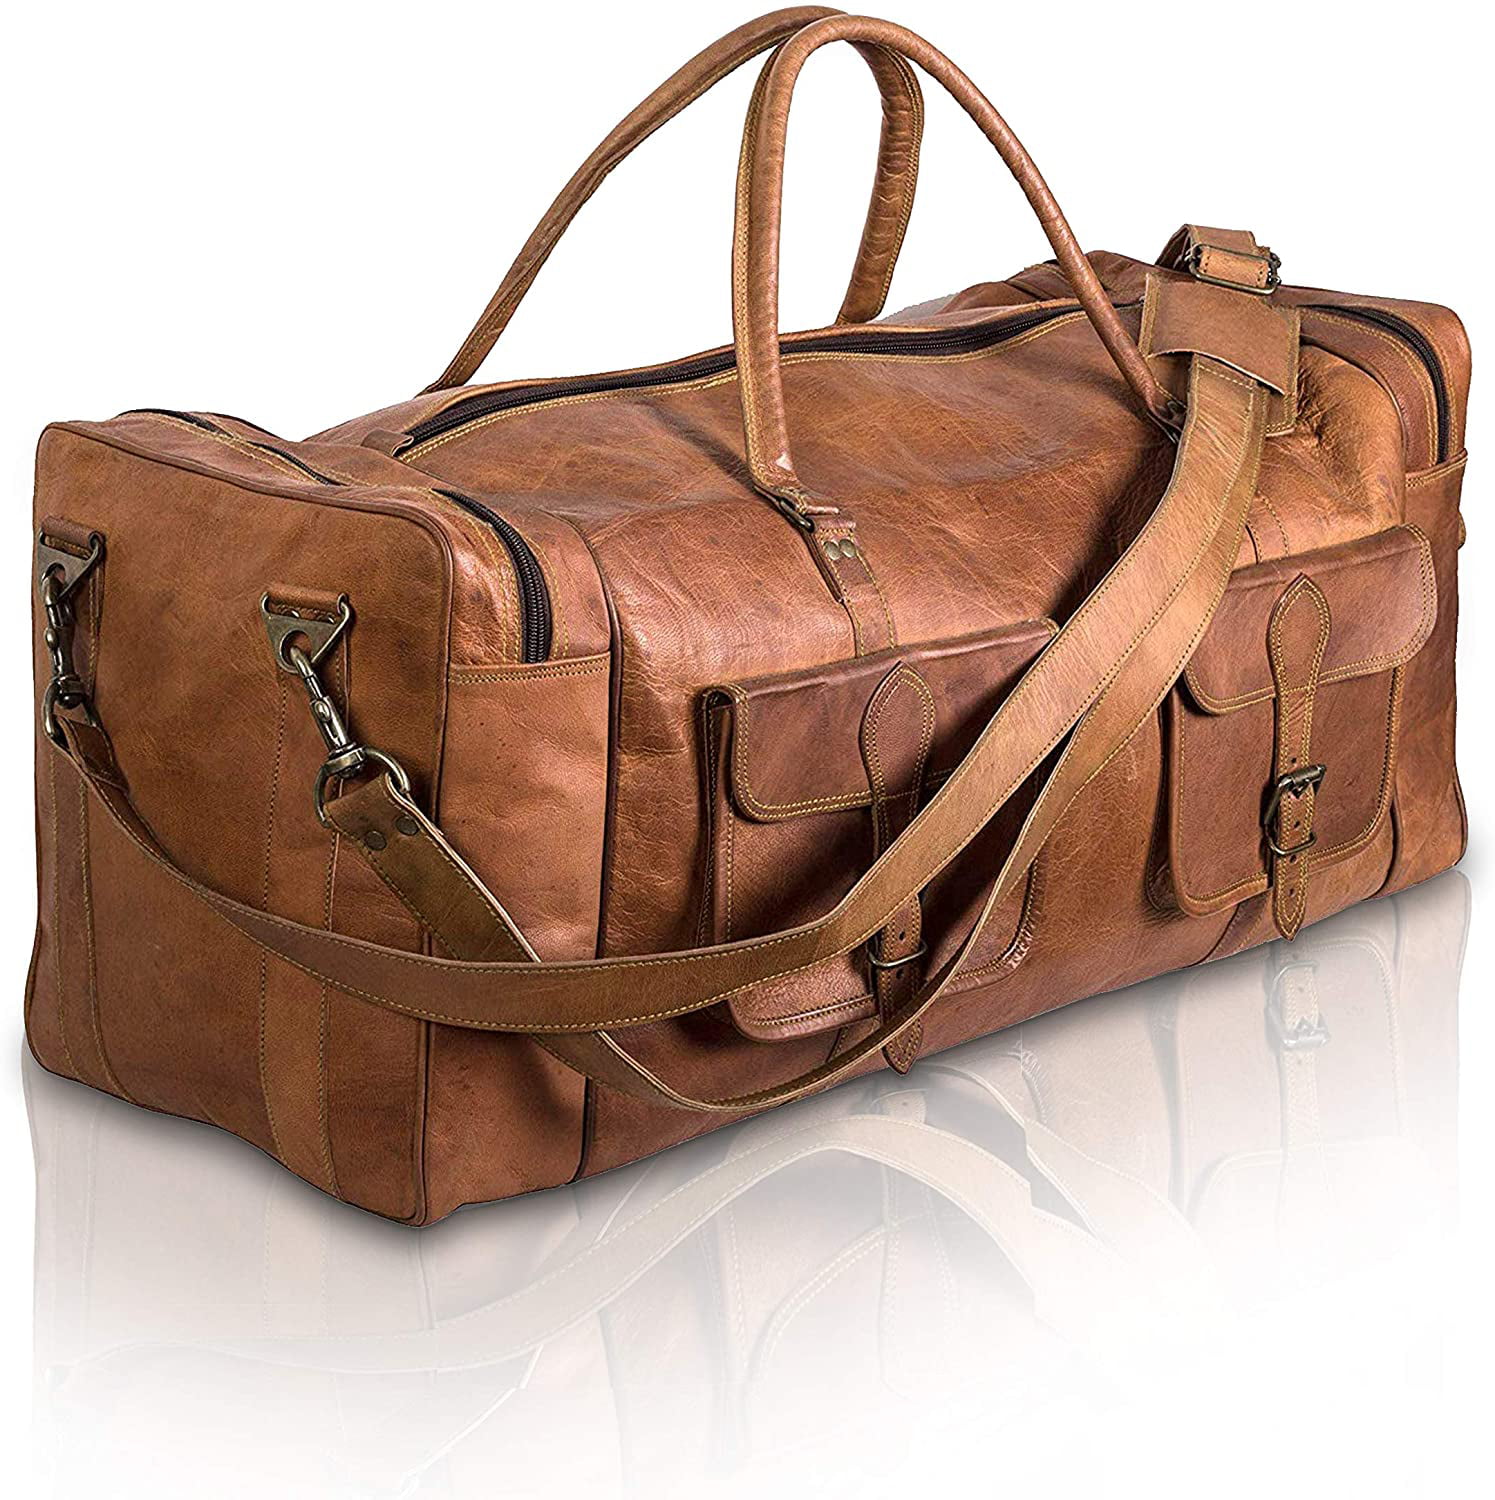 New Large 30" Handcrafted Genuine Leather Travel Duffel Luggage Weekend Gym Bag